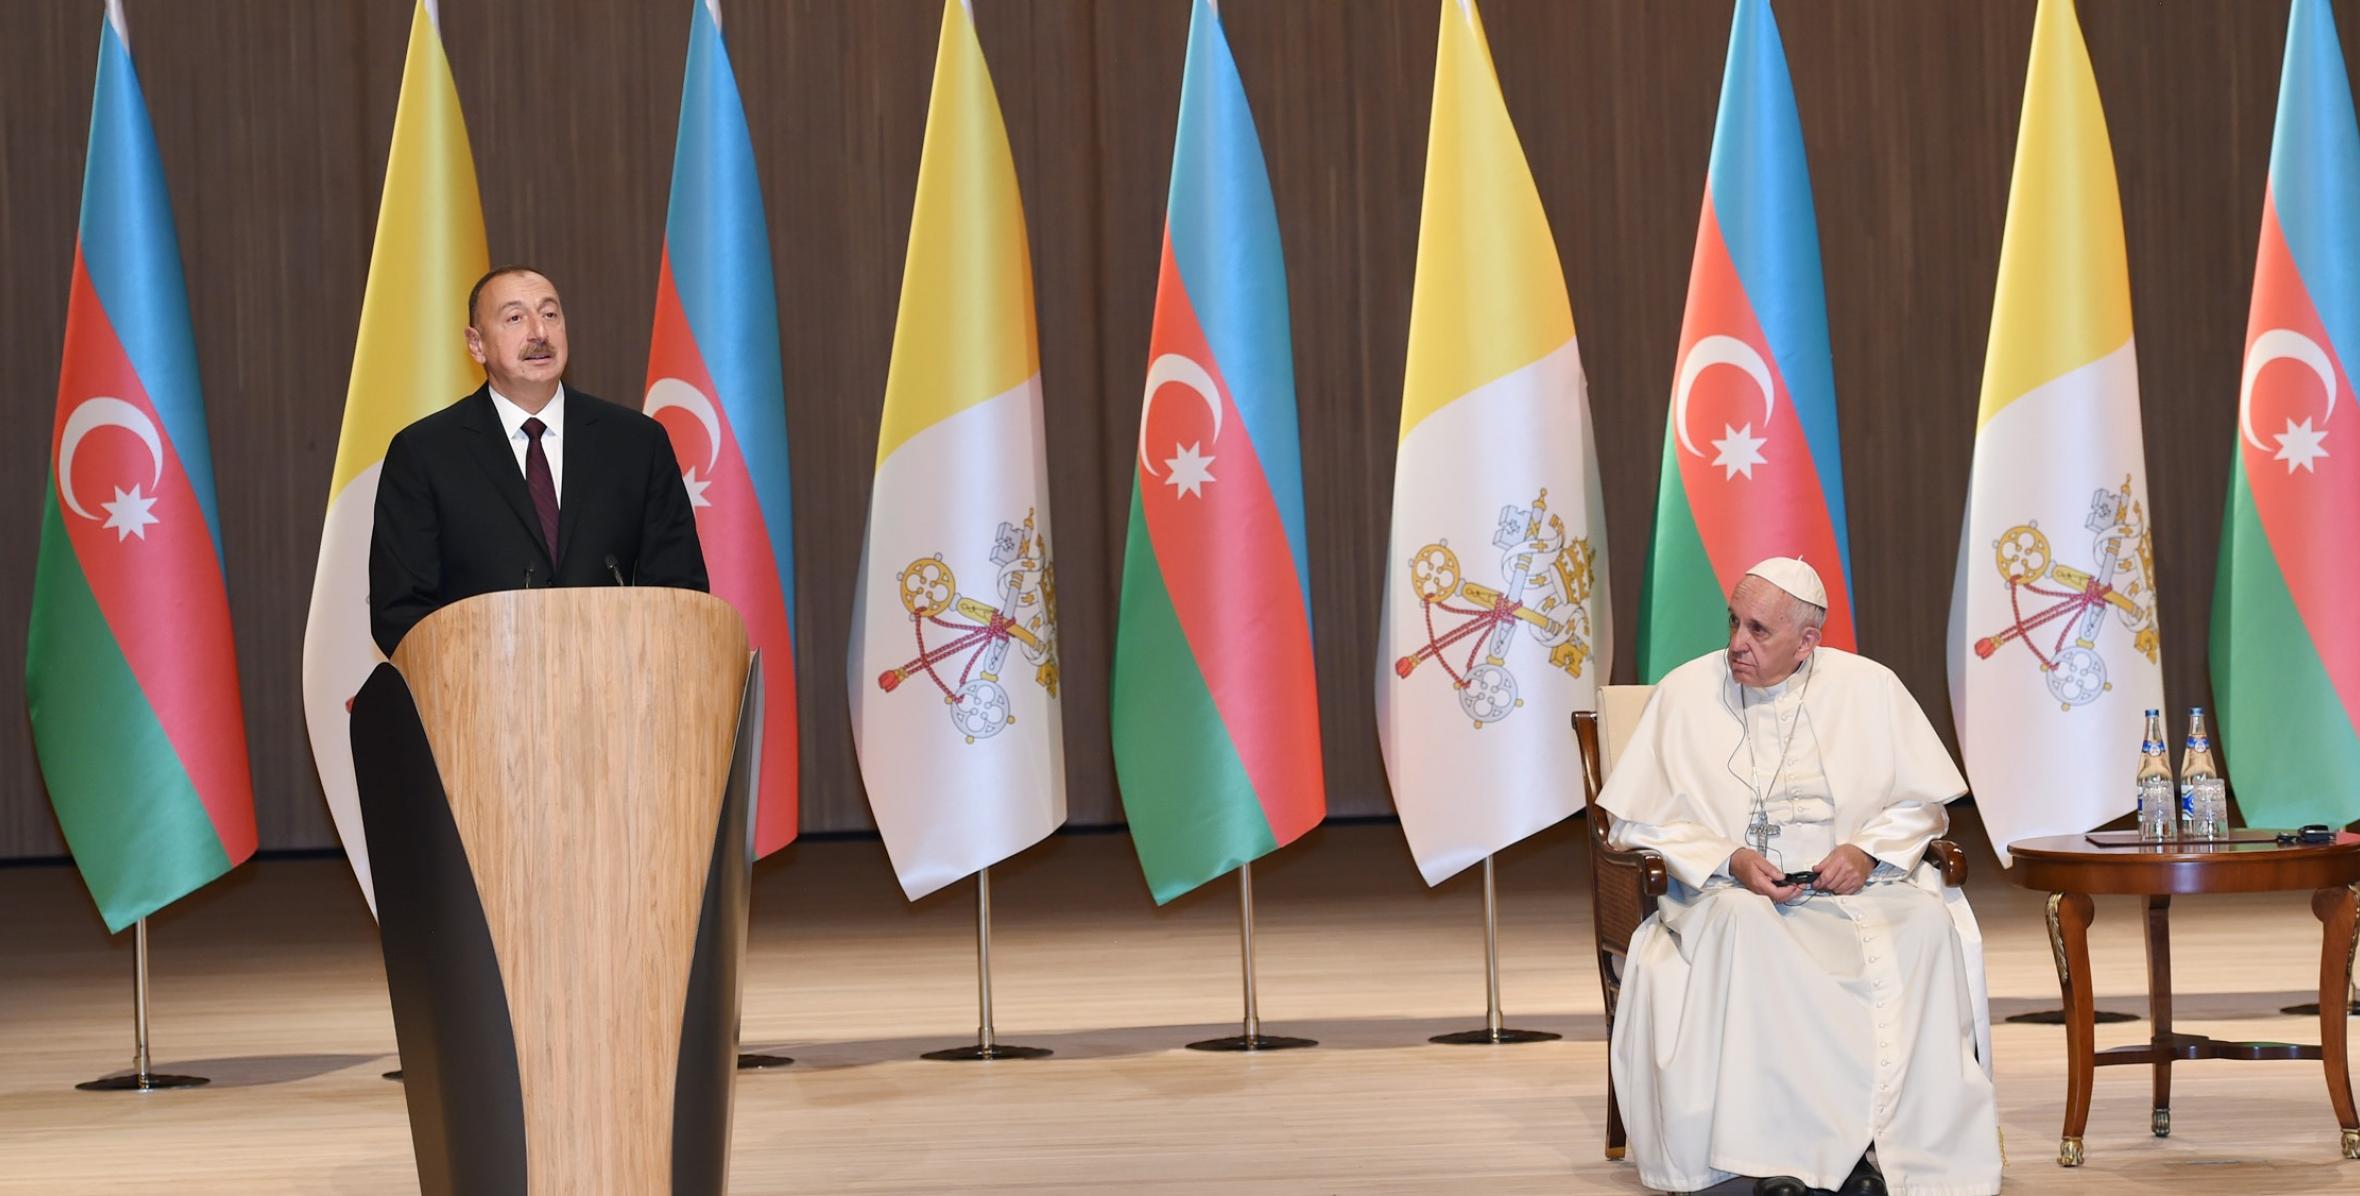 Speech by Ilham Aliyev in front of representatives of the general public at the Heydar Aliyev Center